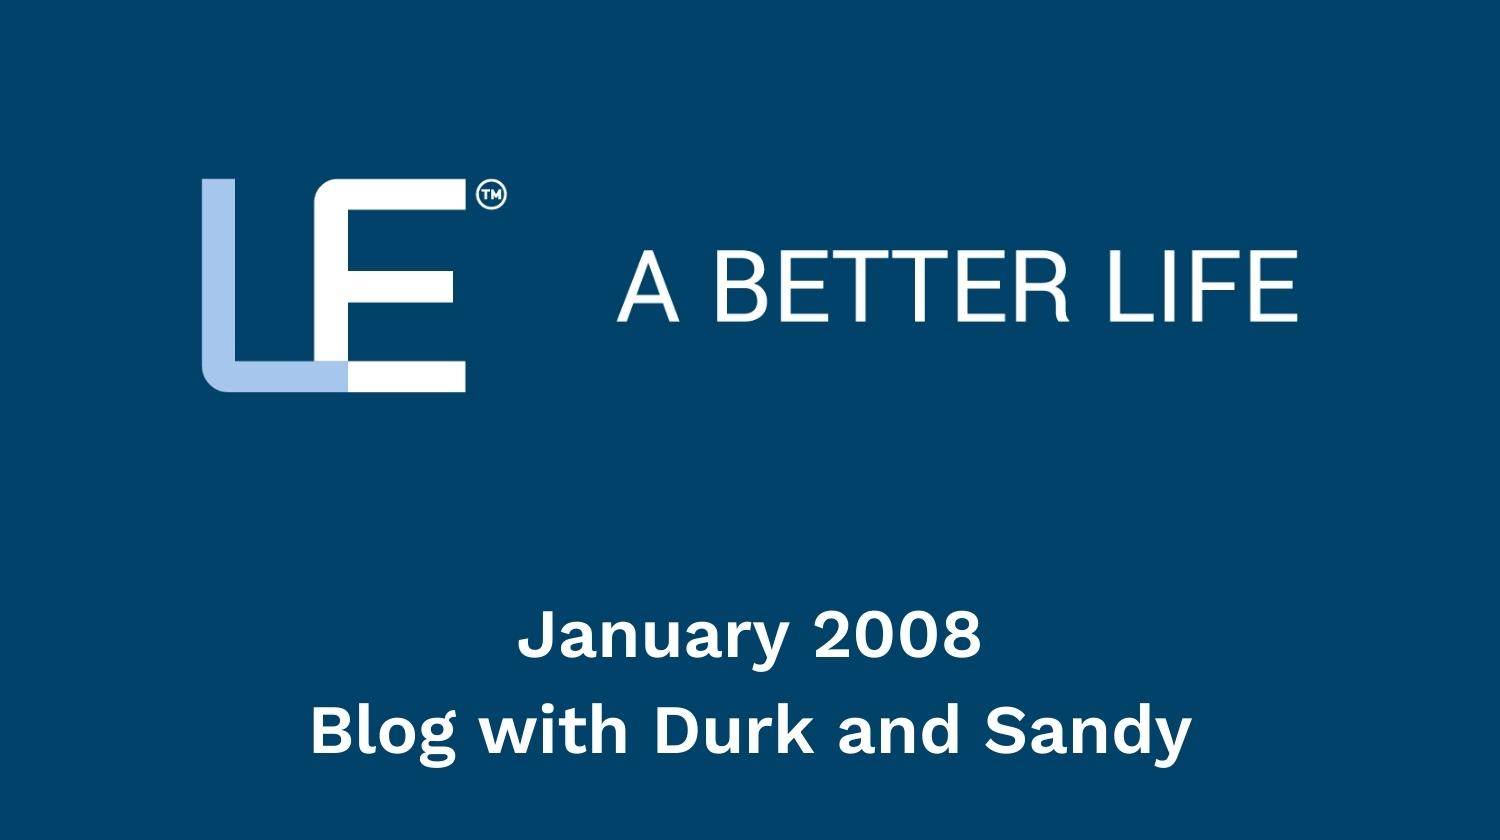 January 2008 Blog with Durk and Sandy